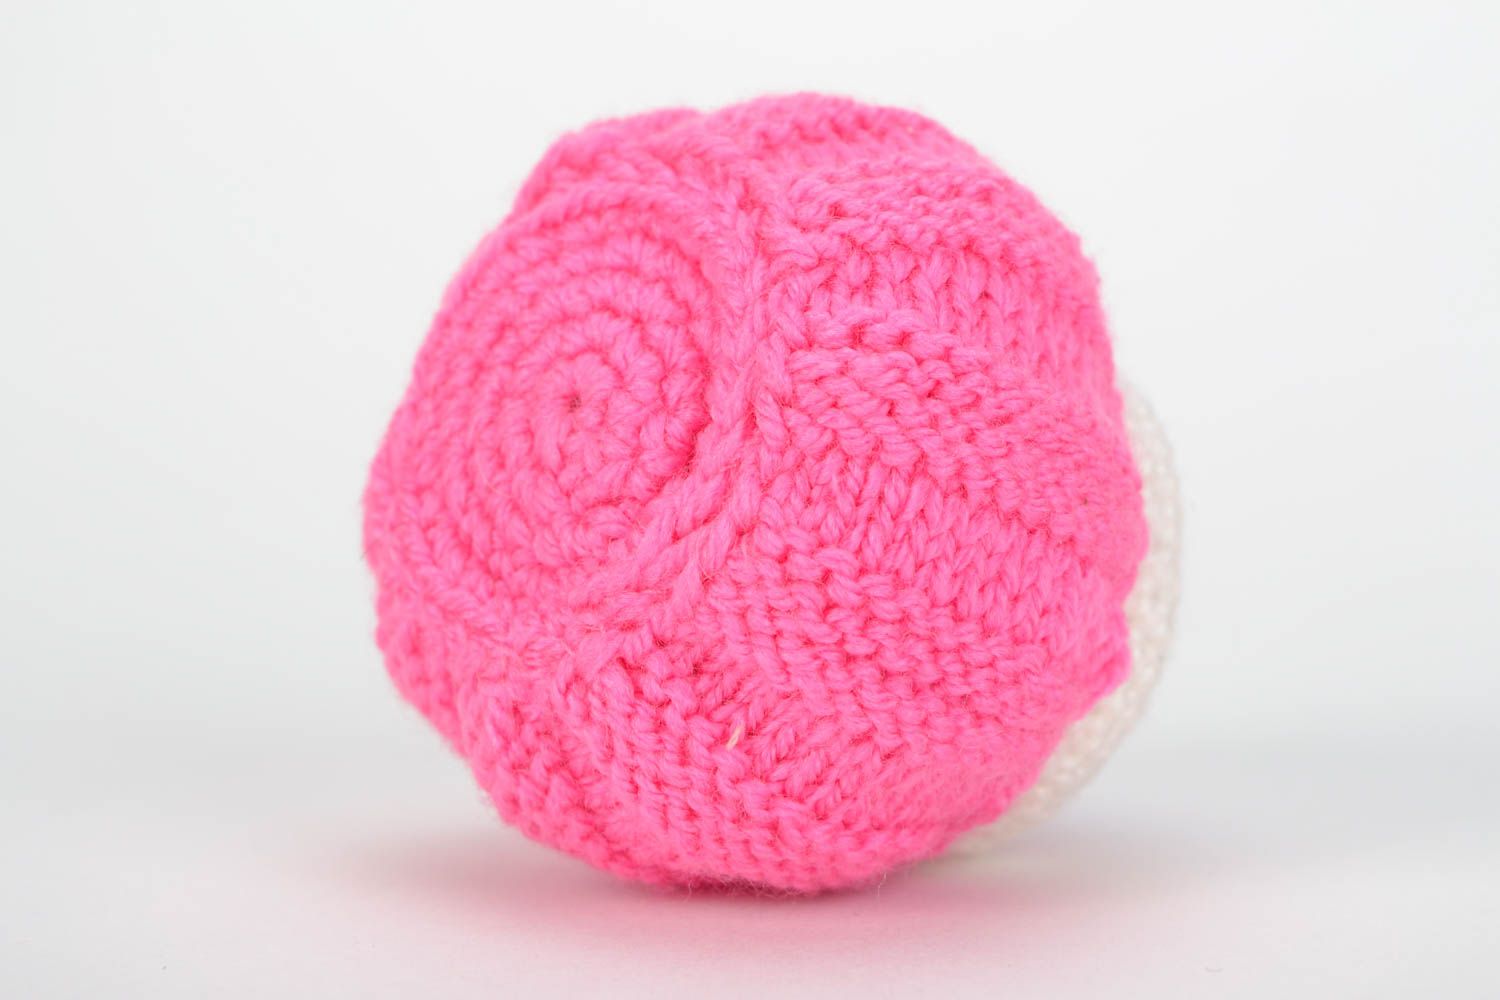 Small pink soft handmade crochet cake for children and home decor photo 5